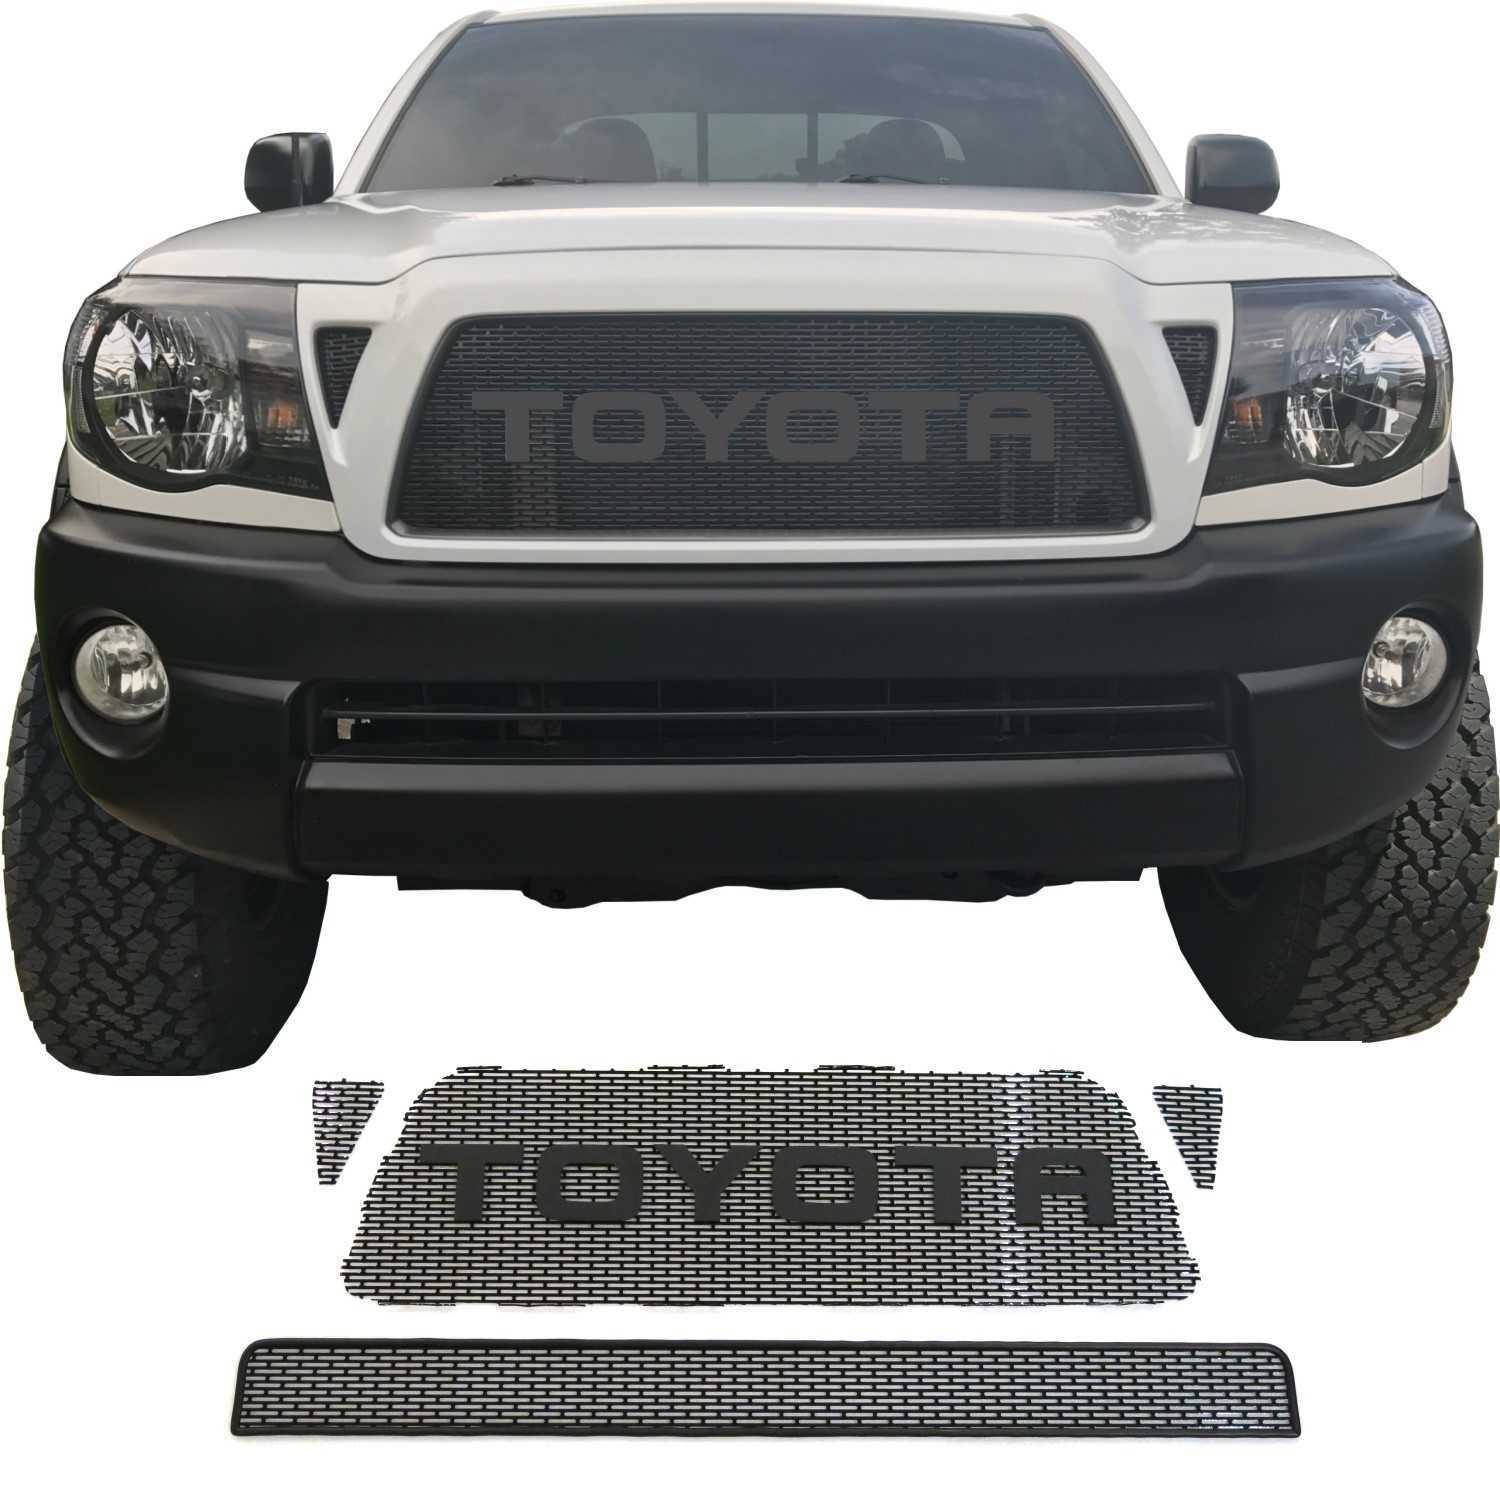 2005 - 2011 Toyota Tacoma Mesh Grill With Rounded Letters